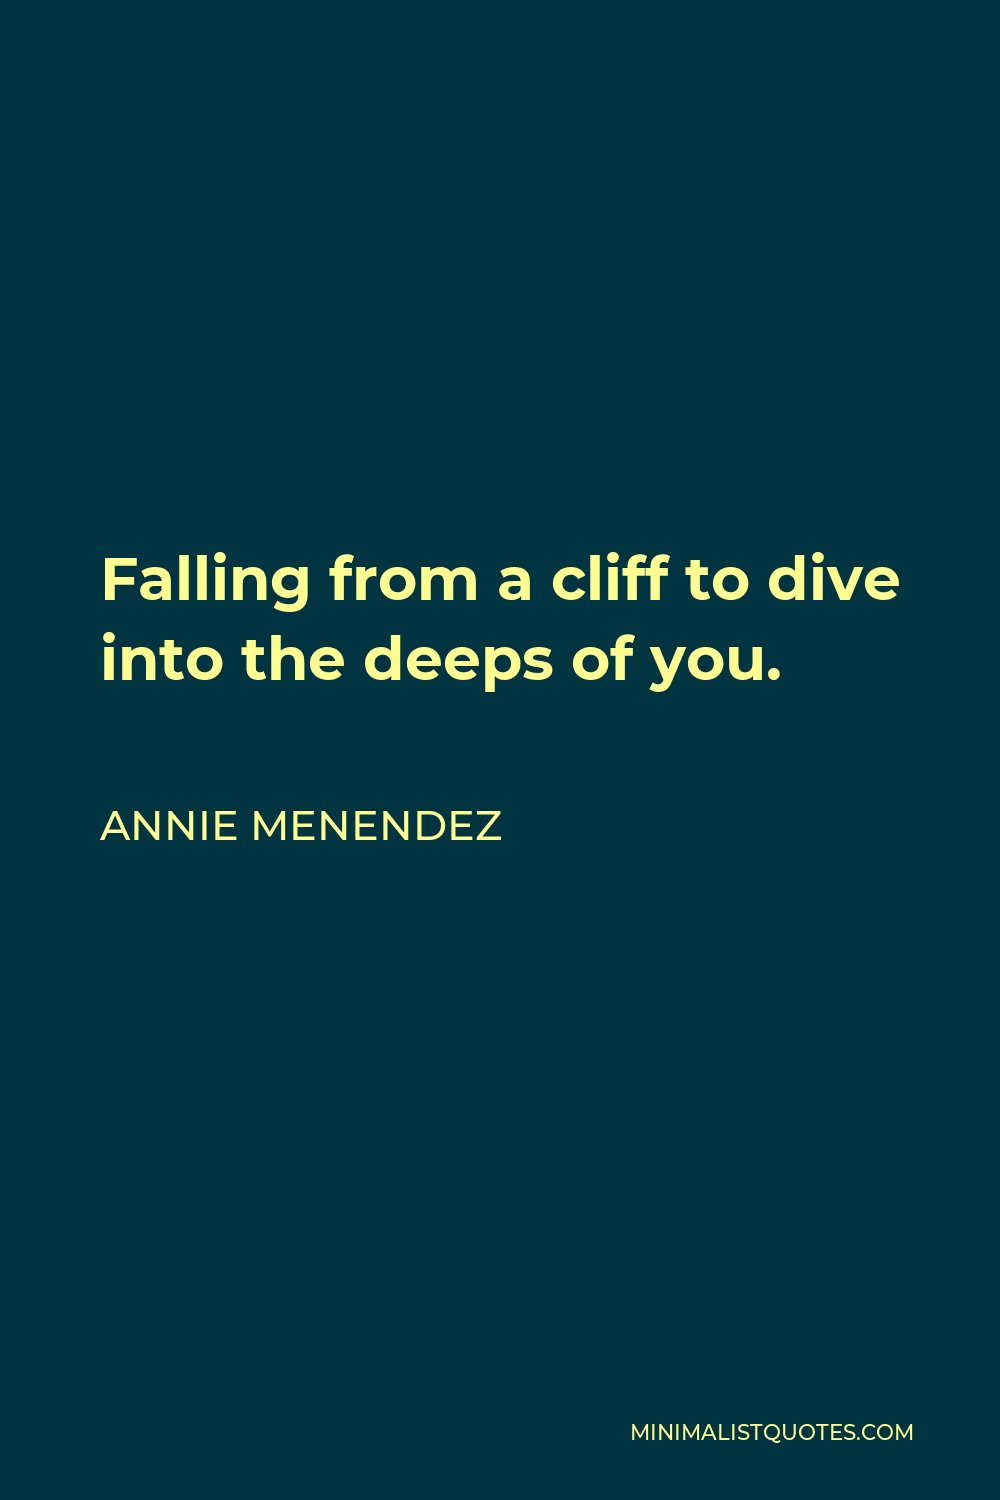 Annie Menendez Quote - Falling from a cliff to dive into the deeps of you.